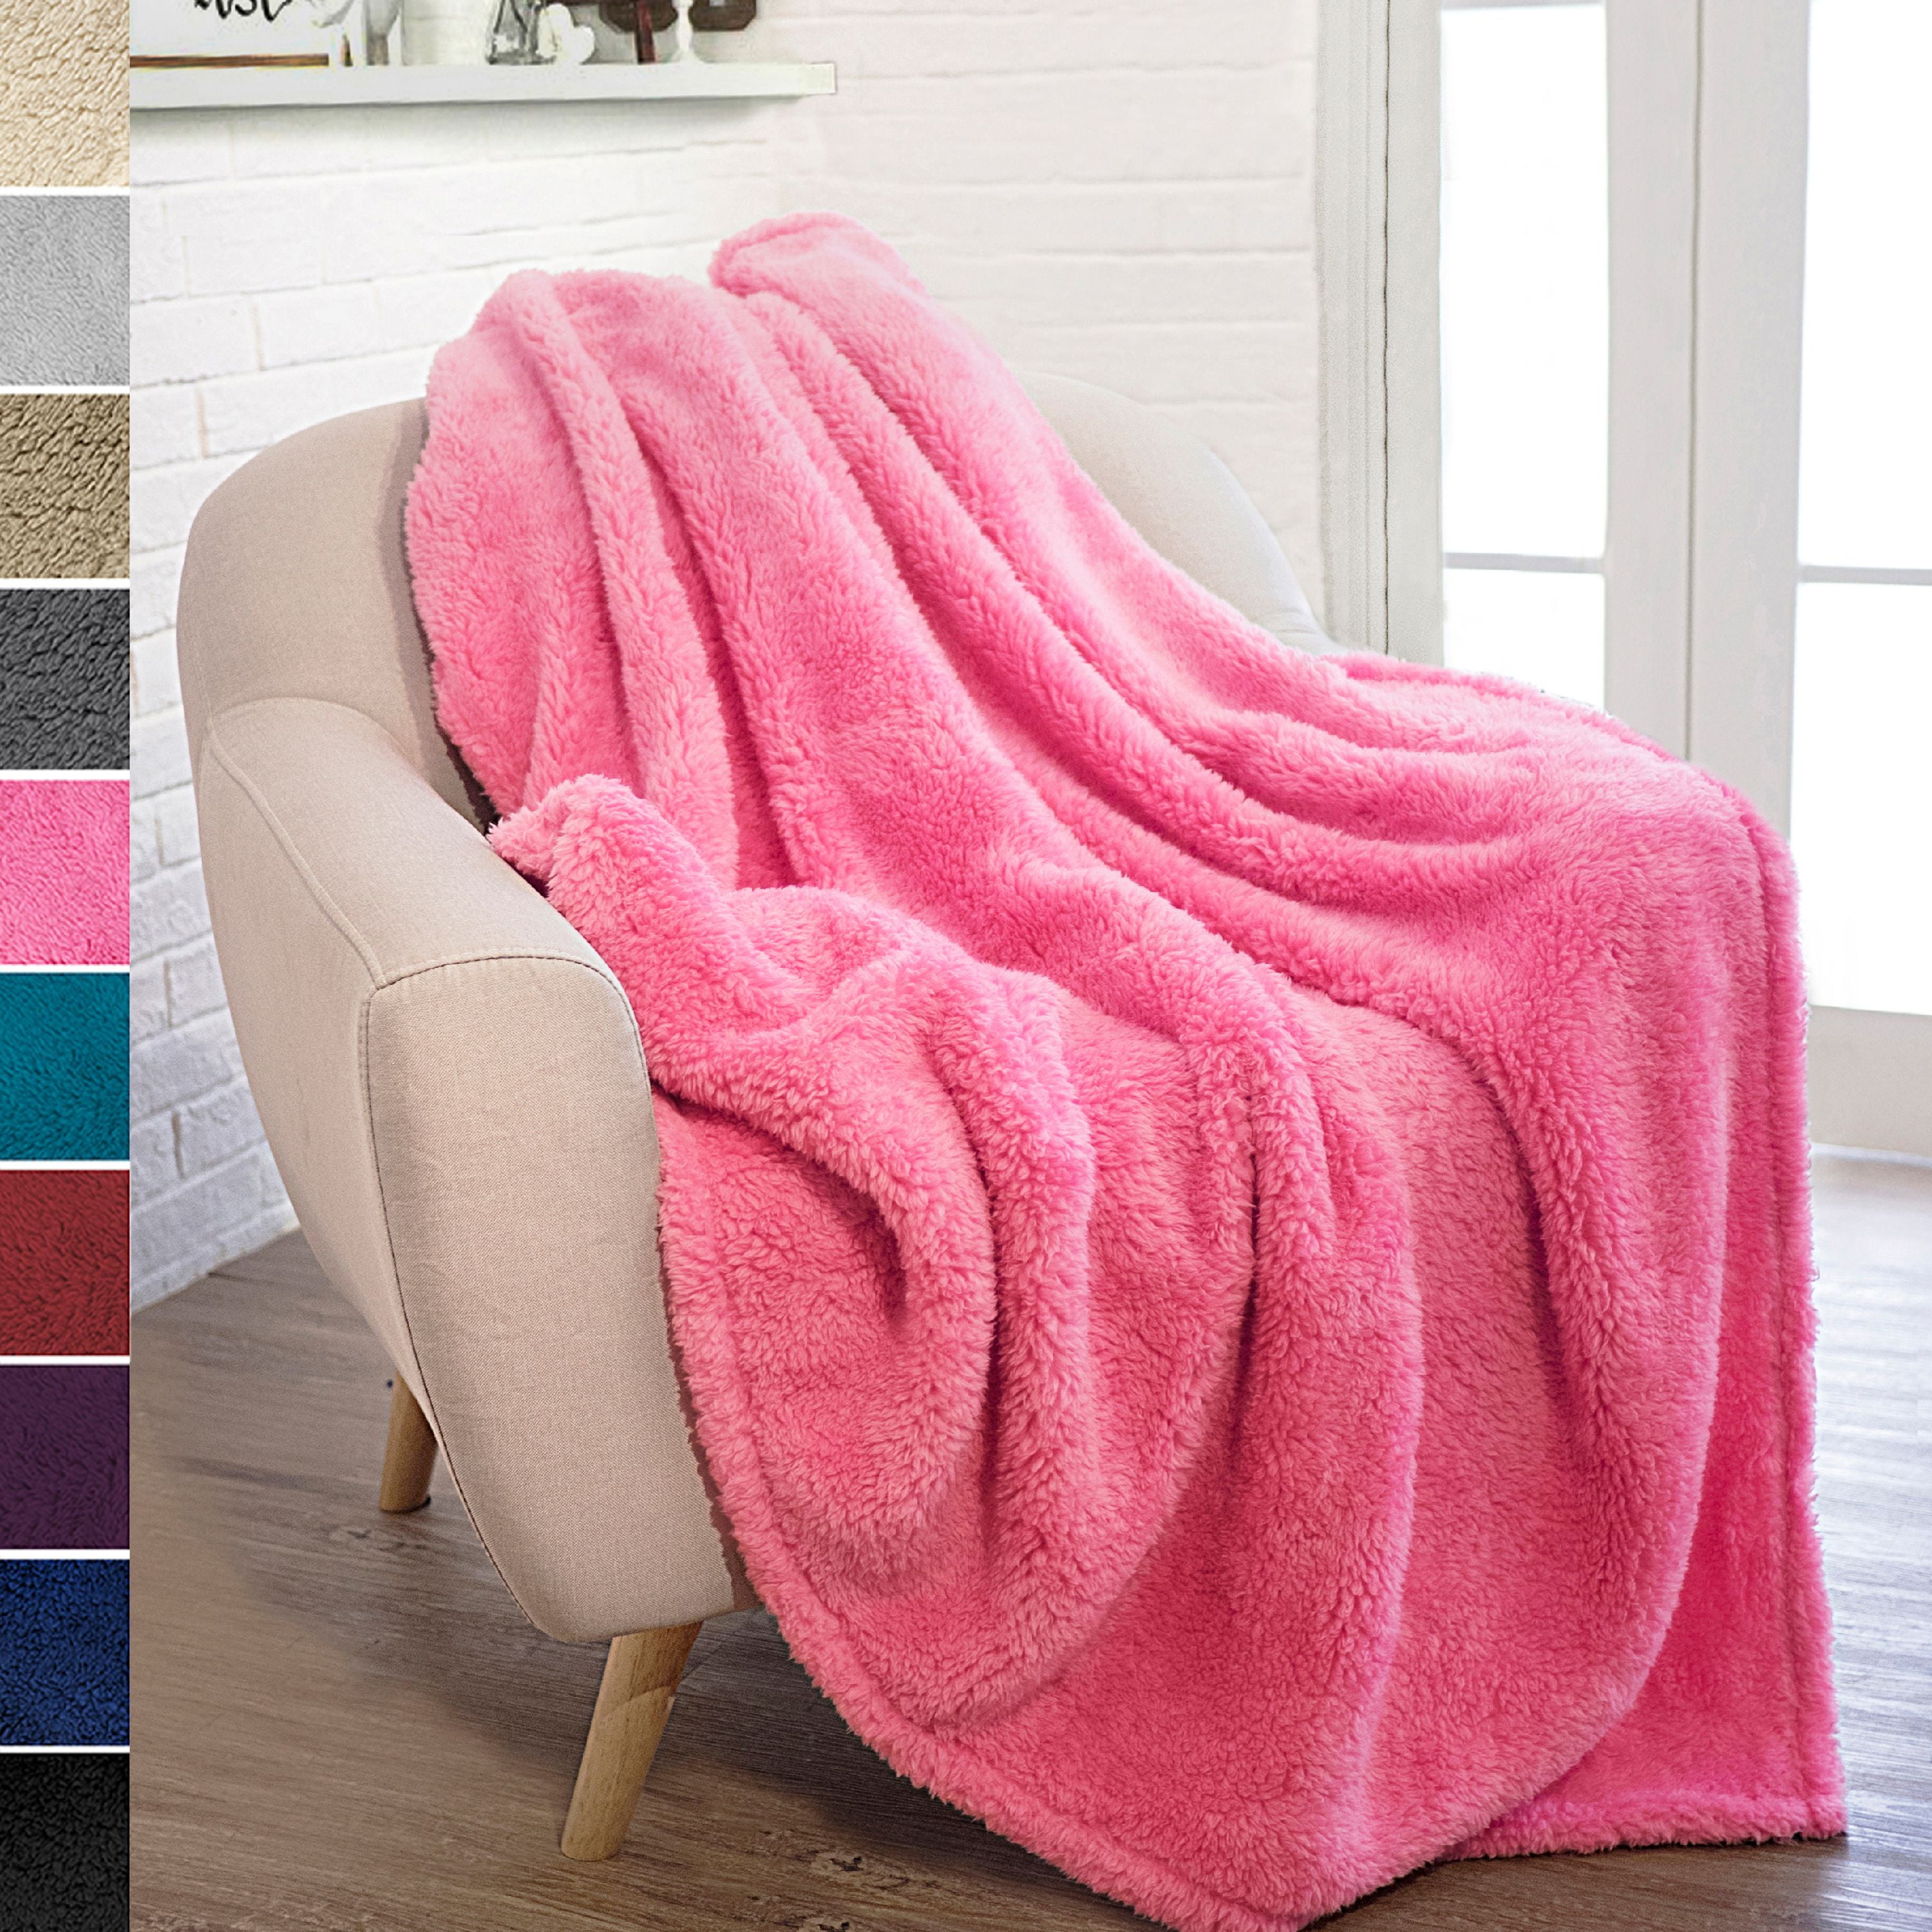 Blankets Ultra-Soft Flannel Throw Blanket Warm Fuzzy Lightweight Blanket,Fluffy Cozy Plush Fleece Comfy Blanket for Couch Sofa Bed 80X60 